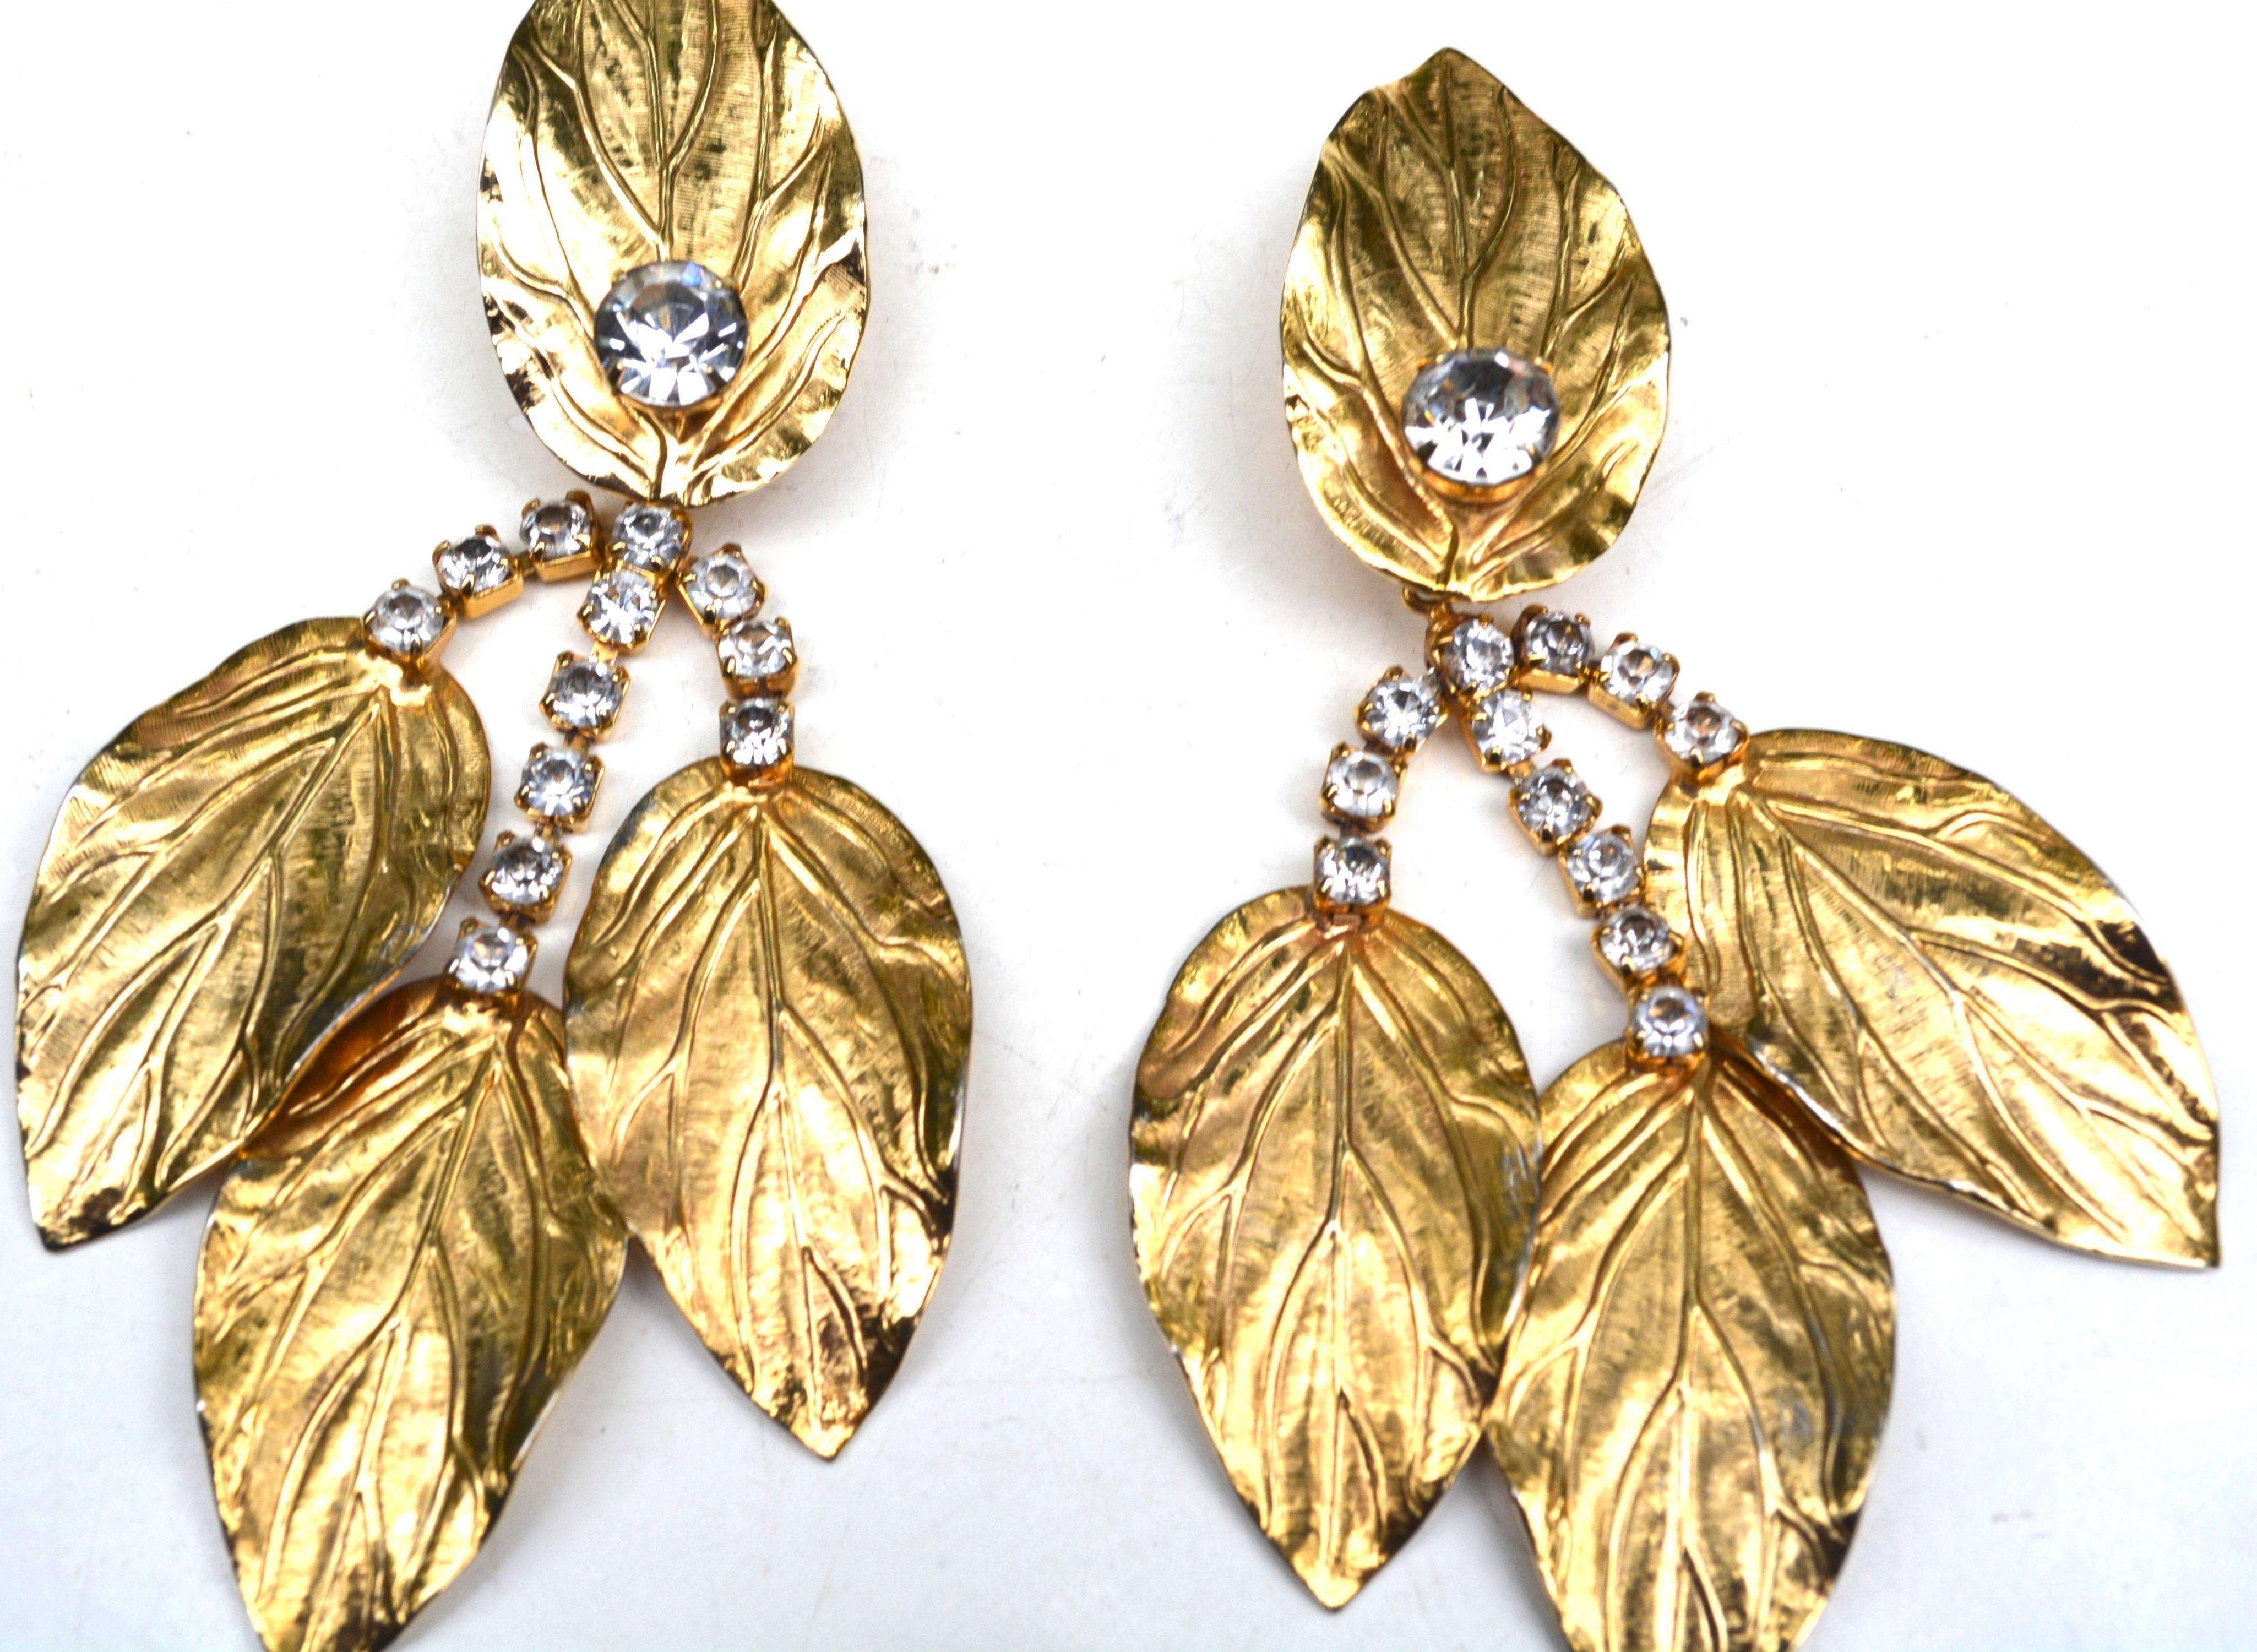 Signed oversized but well weighted golden leaf earrings by Kenneth Jay Lane. Condition is very good. Width varies. 